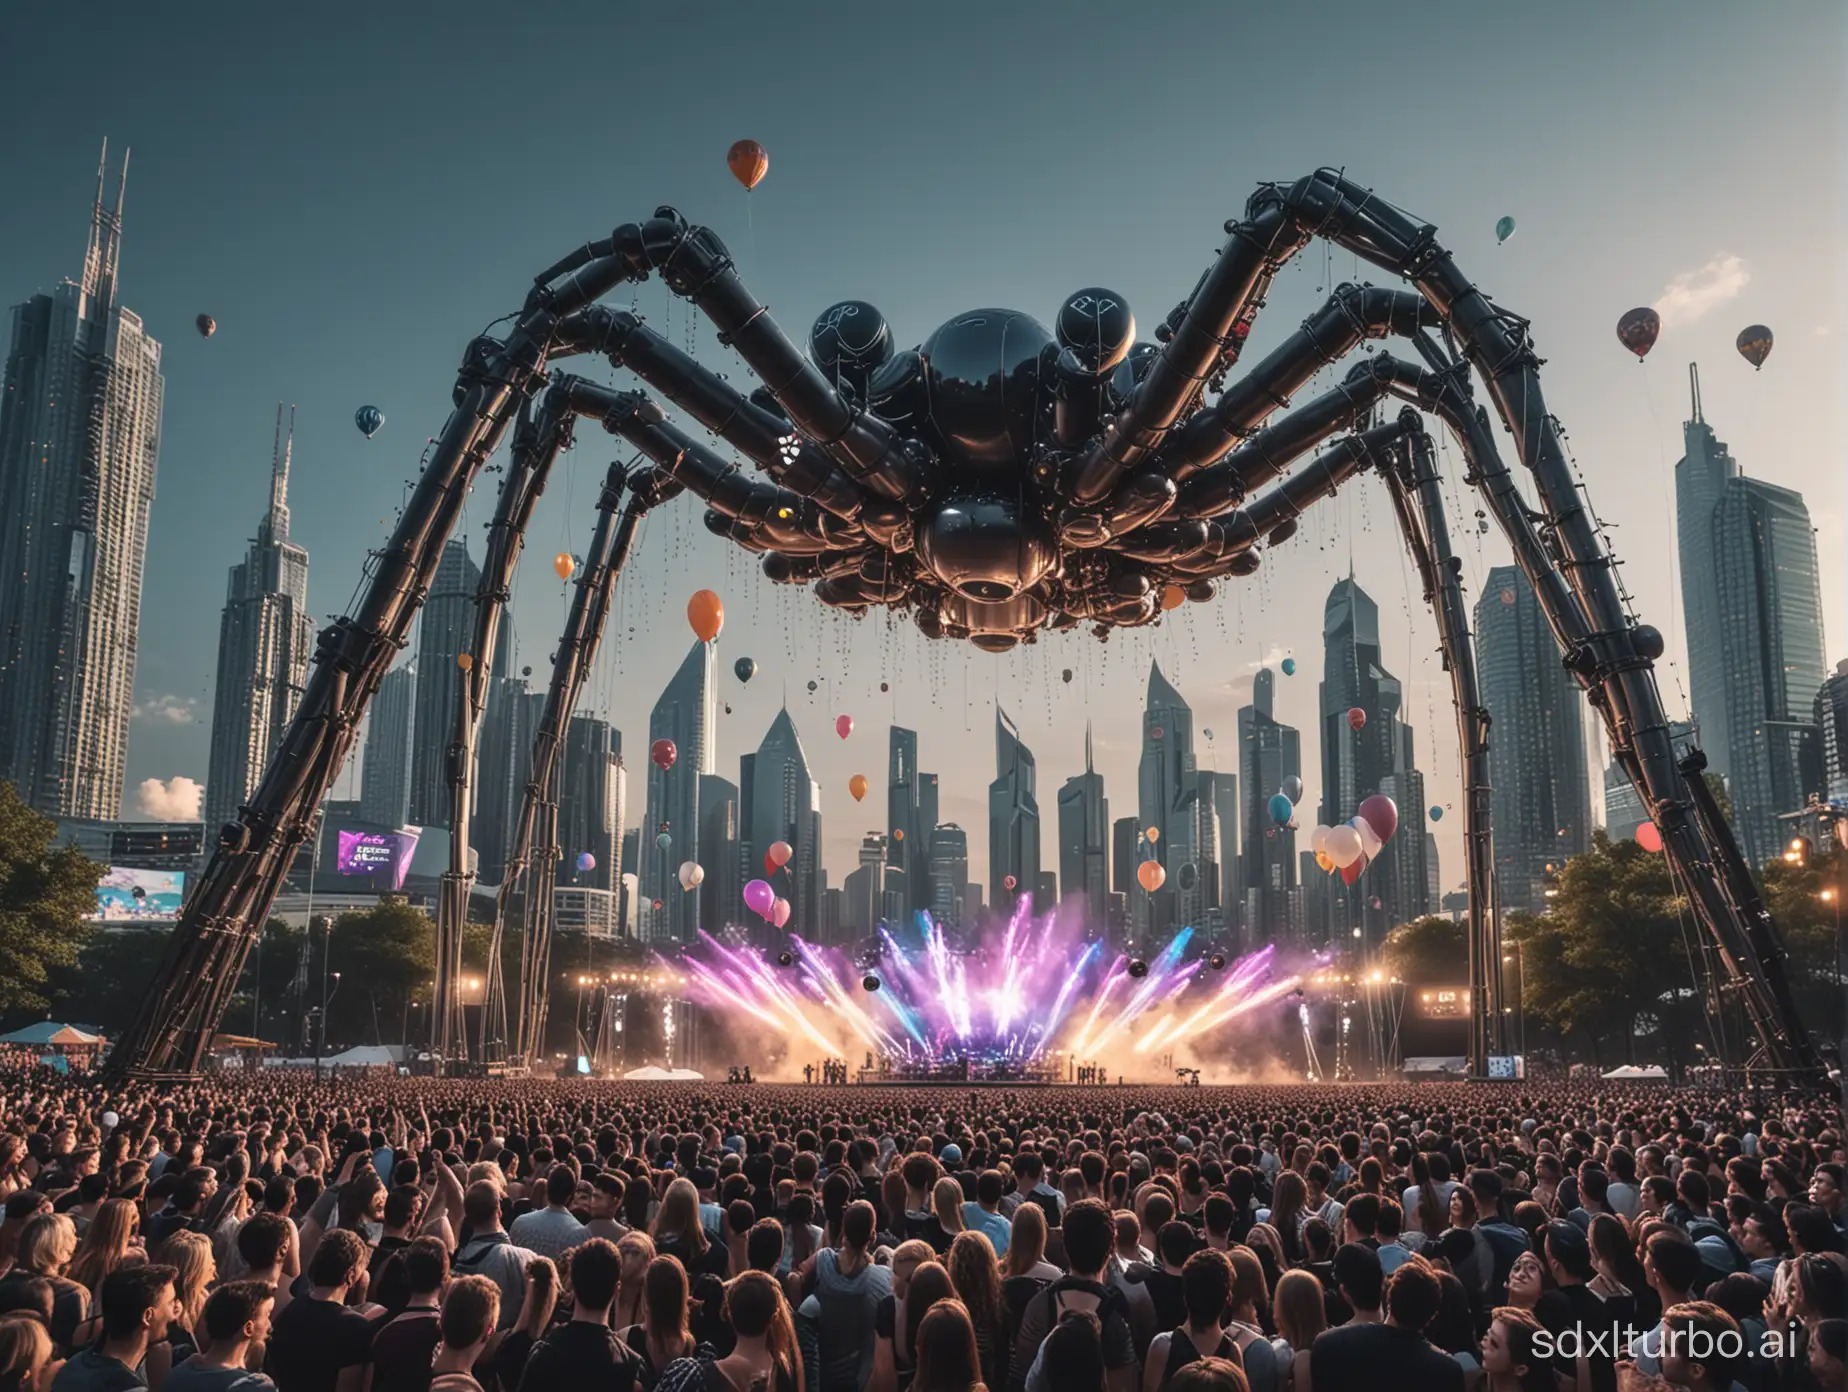 SciFi-Industrial-Style-Music-Festival-with-Steel-Spider-Stage-and-City-Skyline-Background